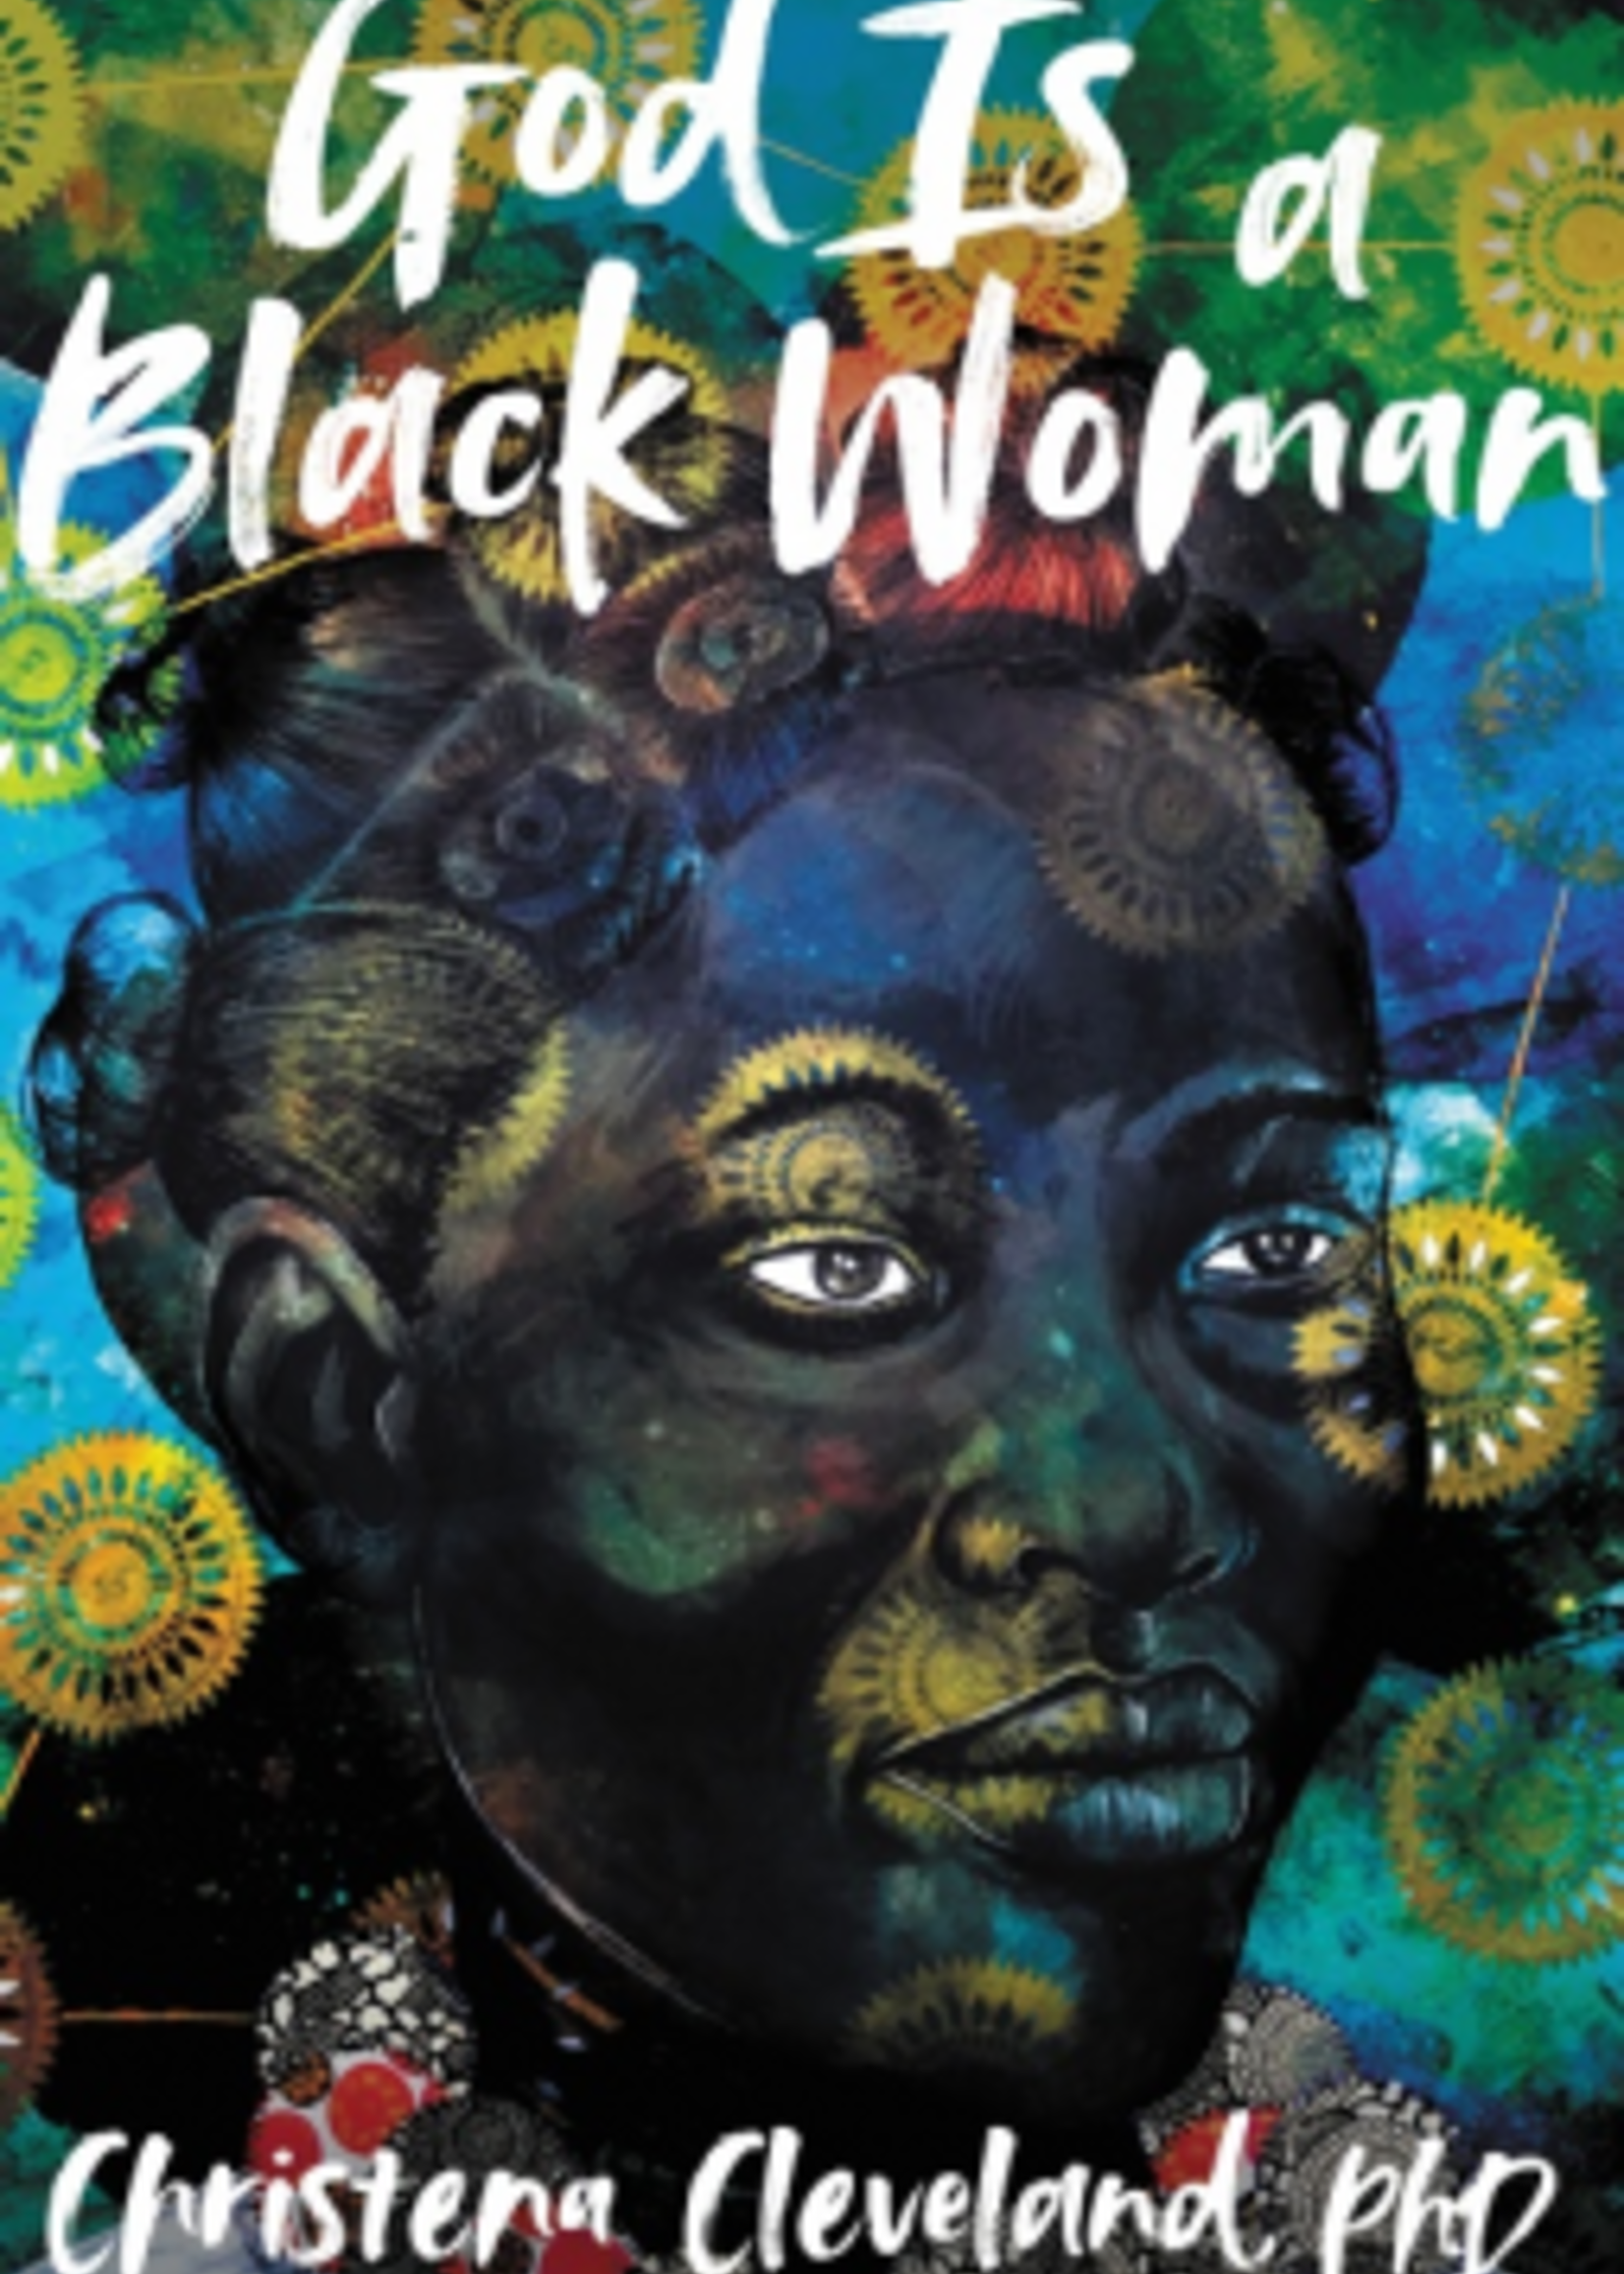 God Is a Black Woman by Christena Cleveland